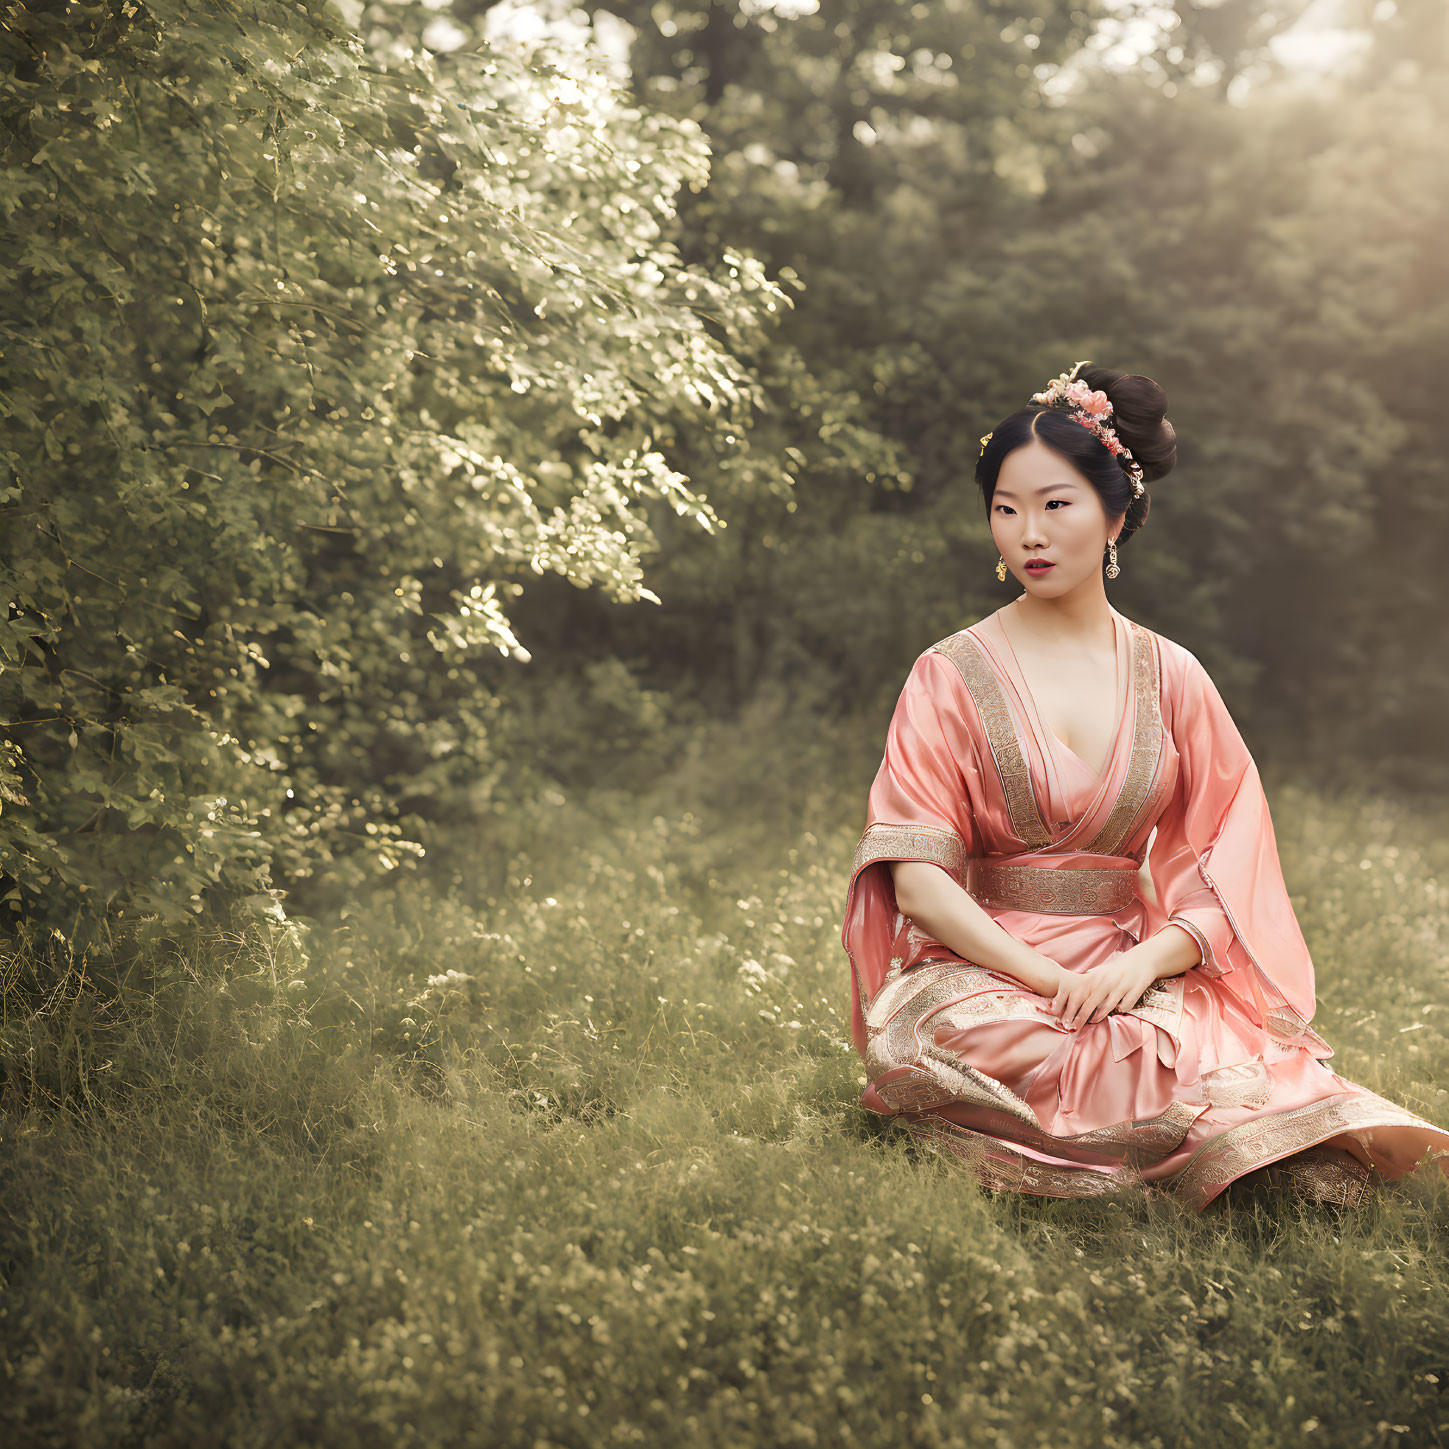 Traditional Asian Attire Woman Sitting Serenely Outdoors